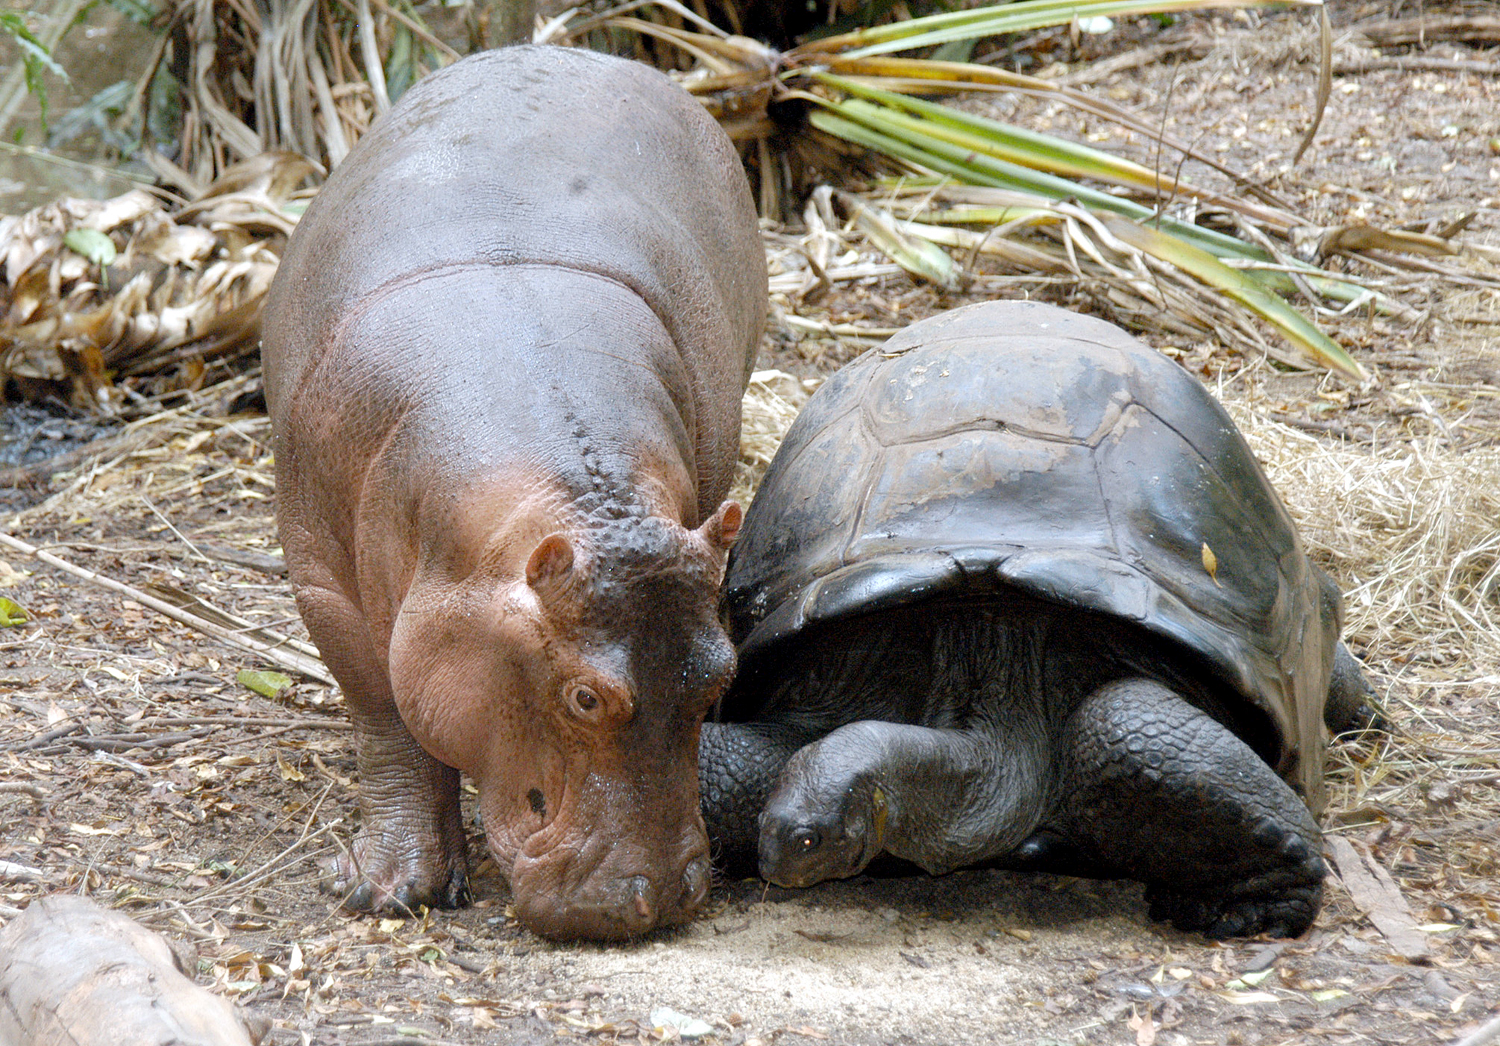 Unlikely friends: Why we love odd animal pairs